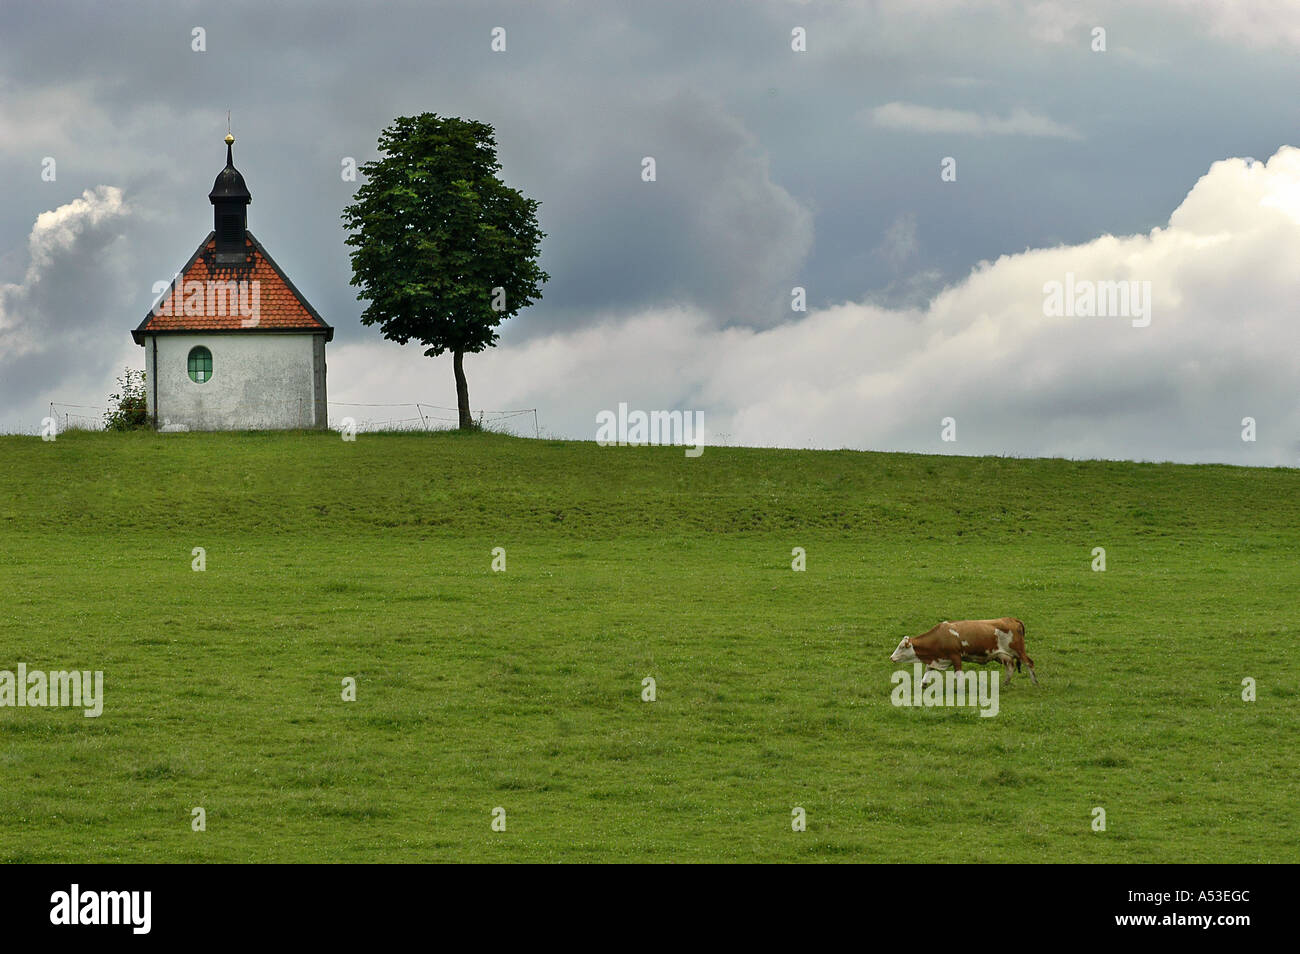 Grazing cow on pasture, chapel and tree, Bavaria, Germany Stock Photo